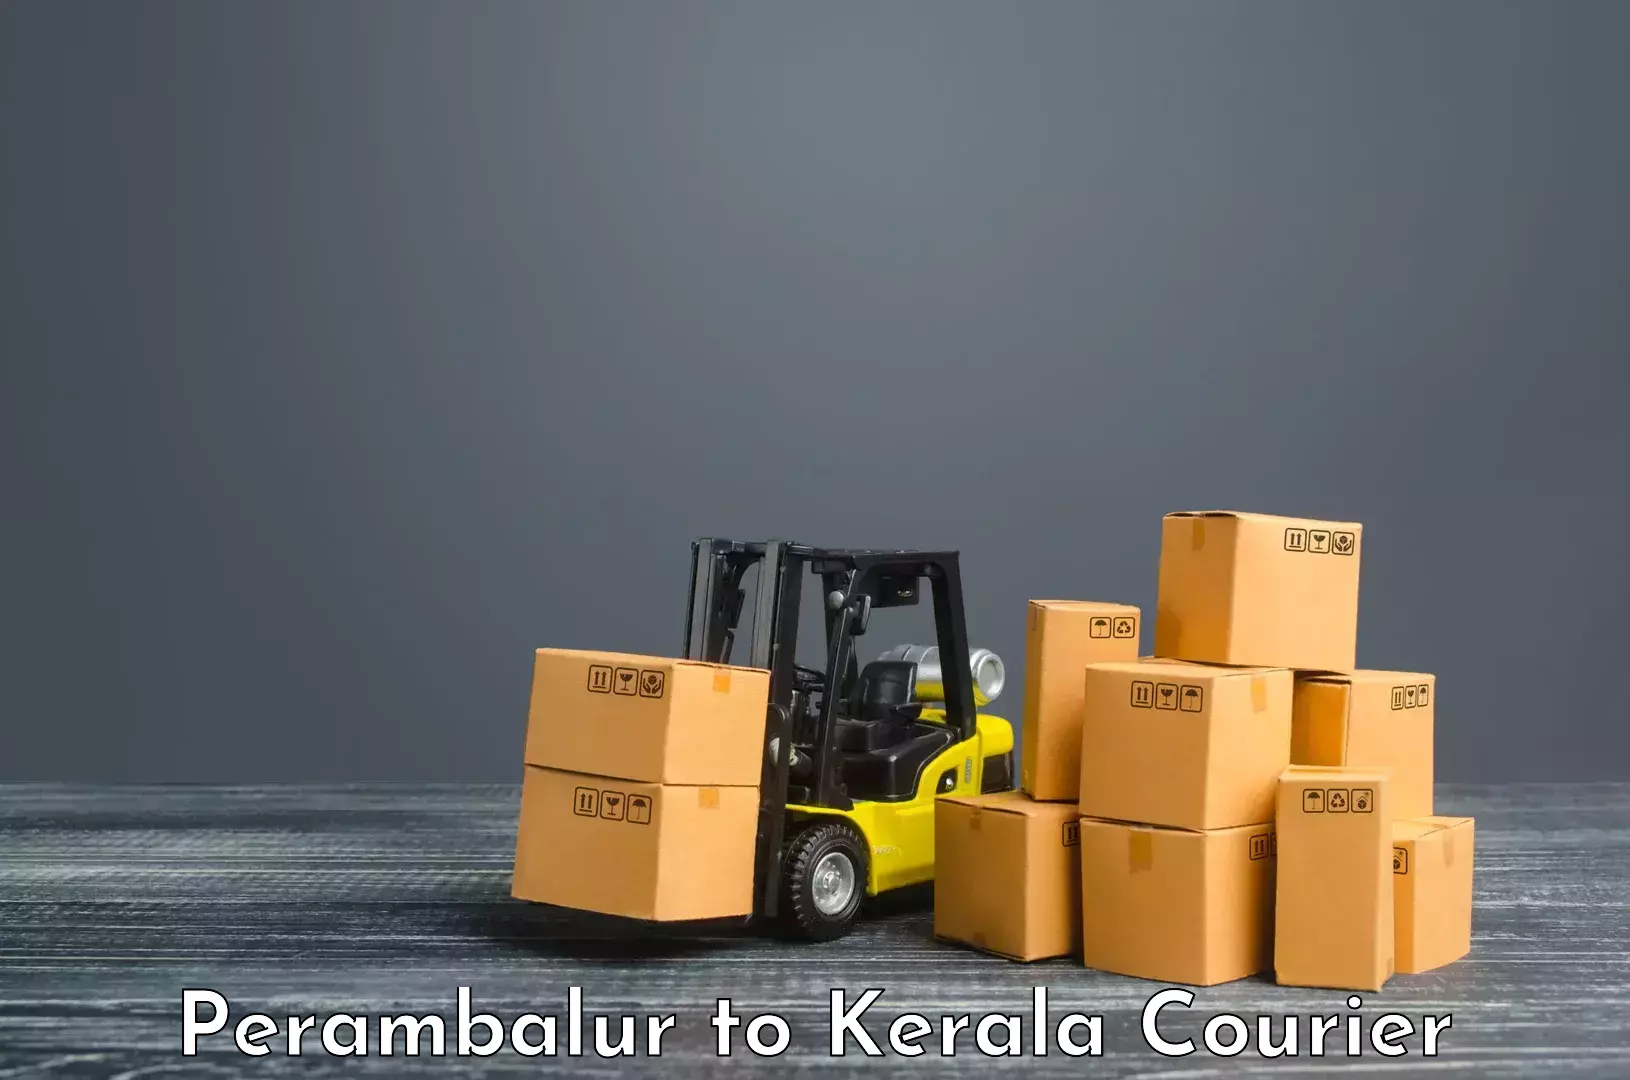 Budget-friendly shipping in Perambalur to Alappuzha